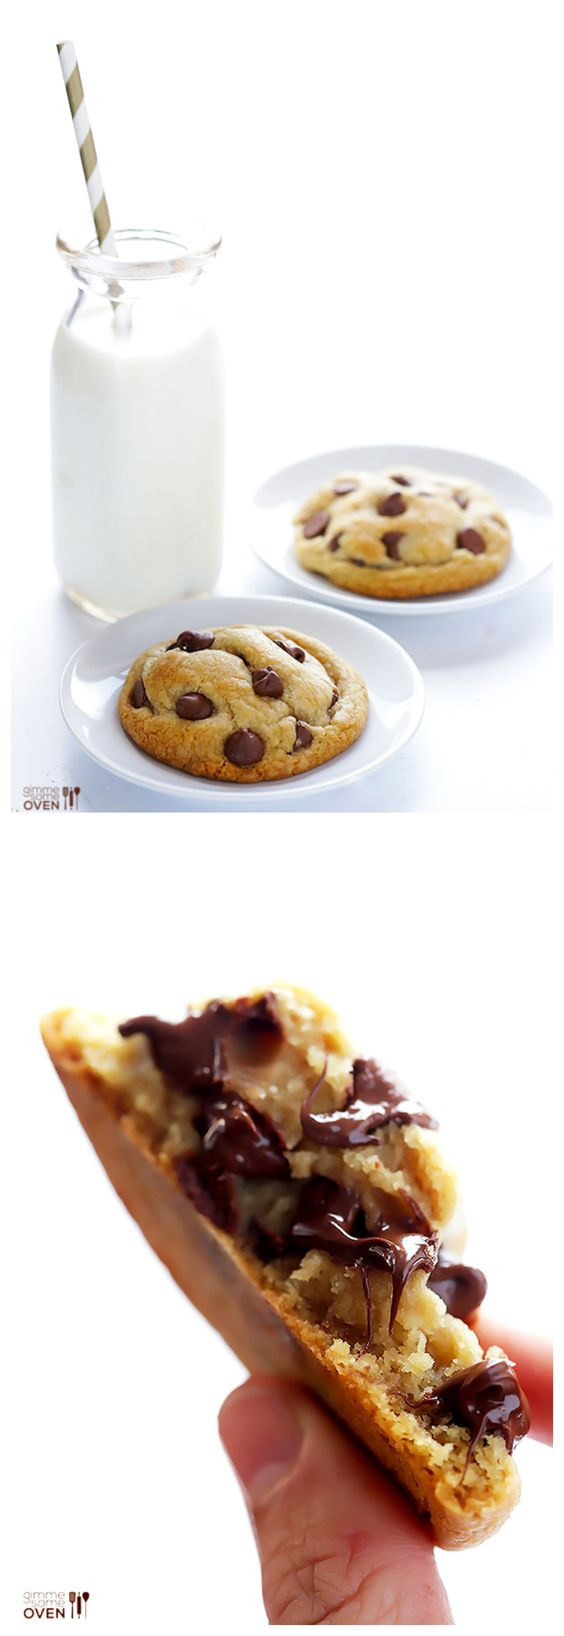 Easy Desserts With Chocolate Chips
 Pinterest • The world’s catalog of ideas